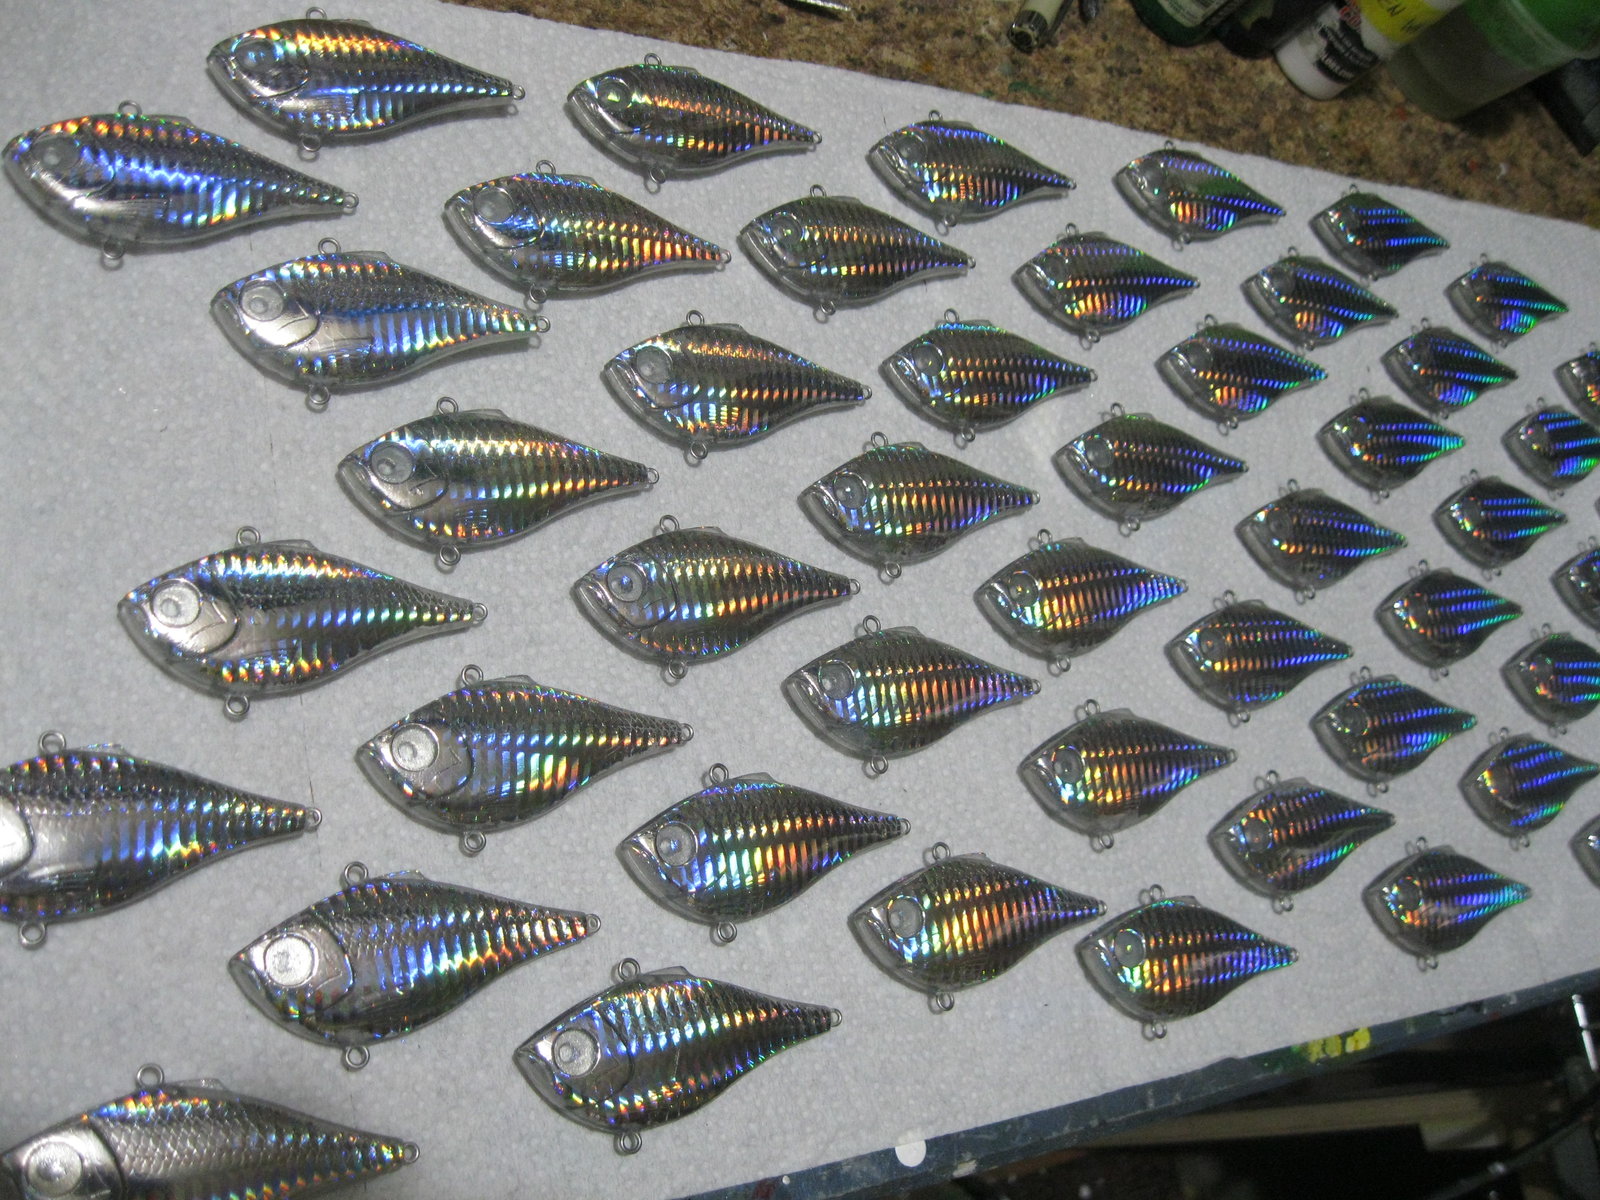 Holographic foil on some lipless blanks. - Hard Baits